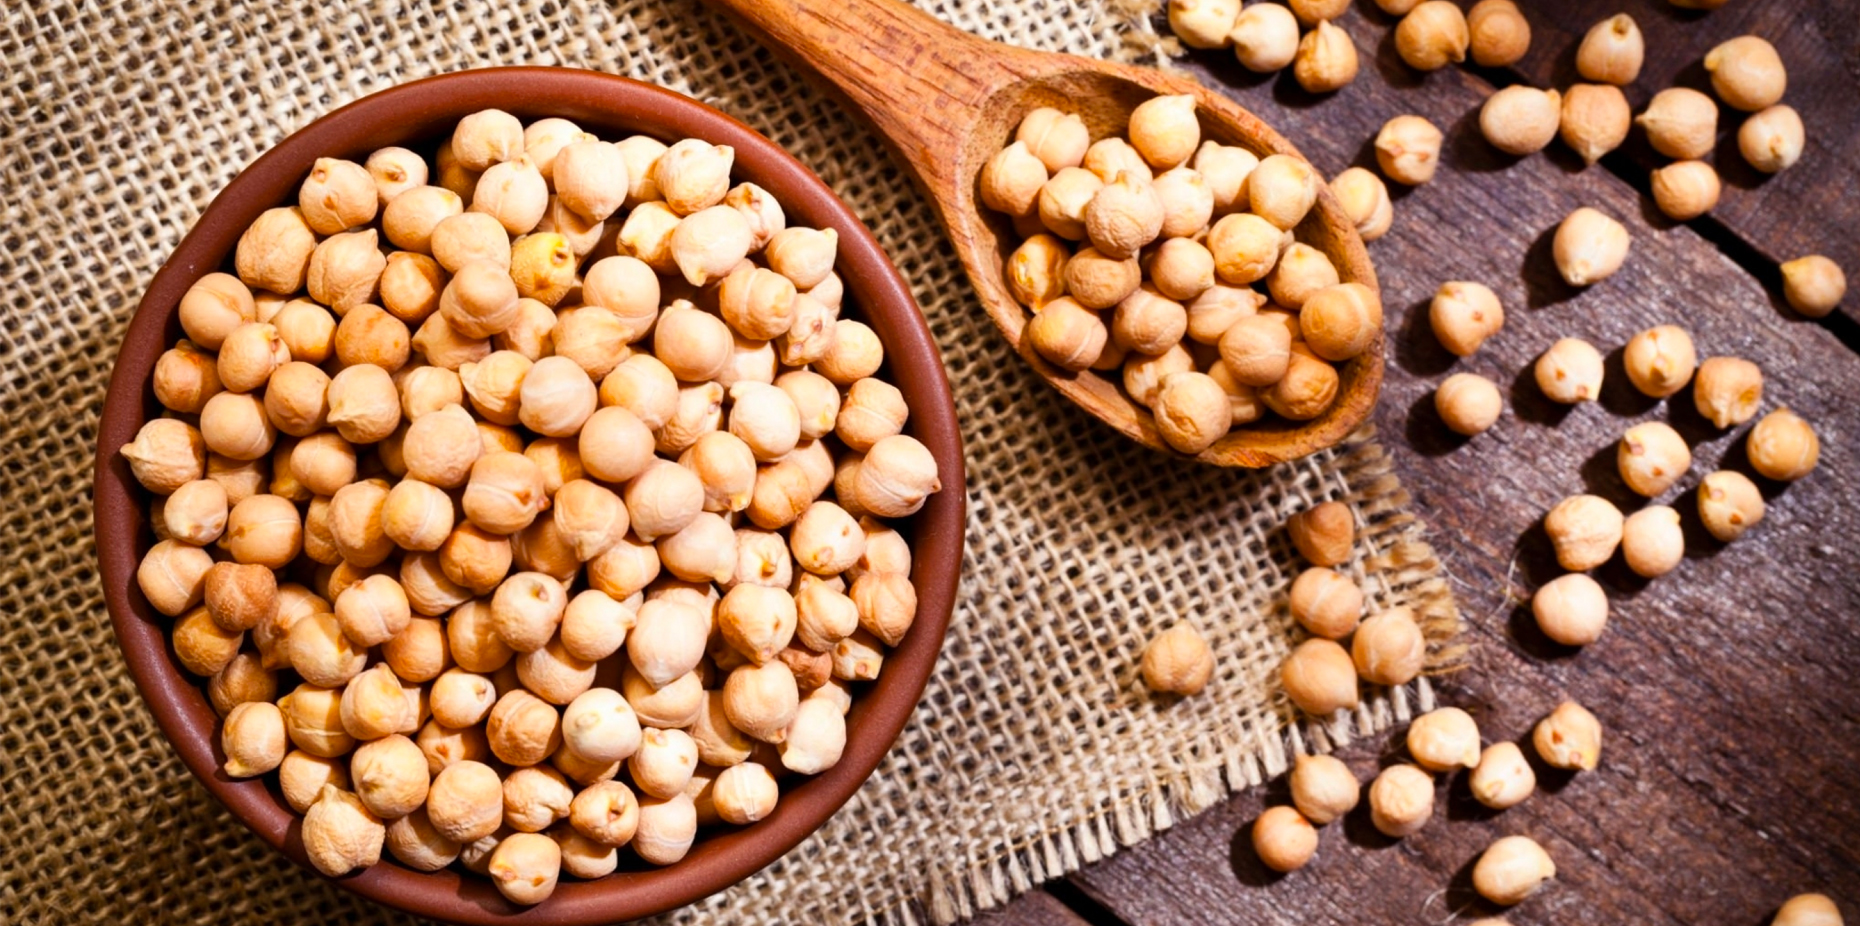 Chickpeas: Facts, Nutrition, Benefits & More